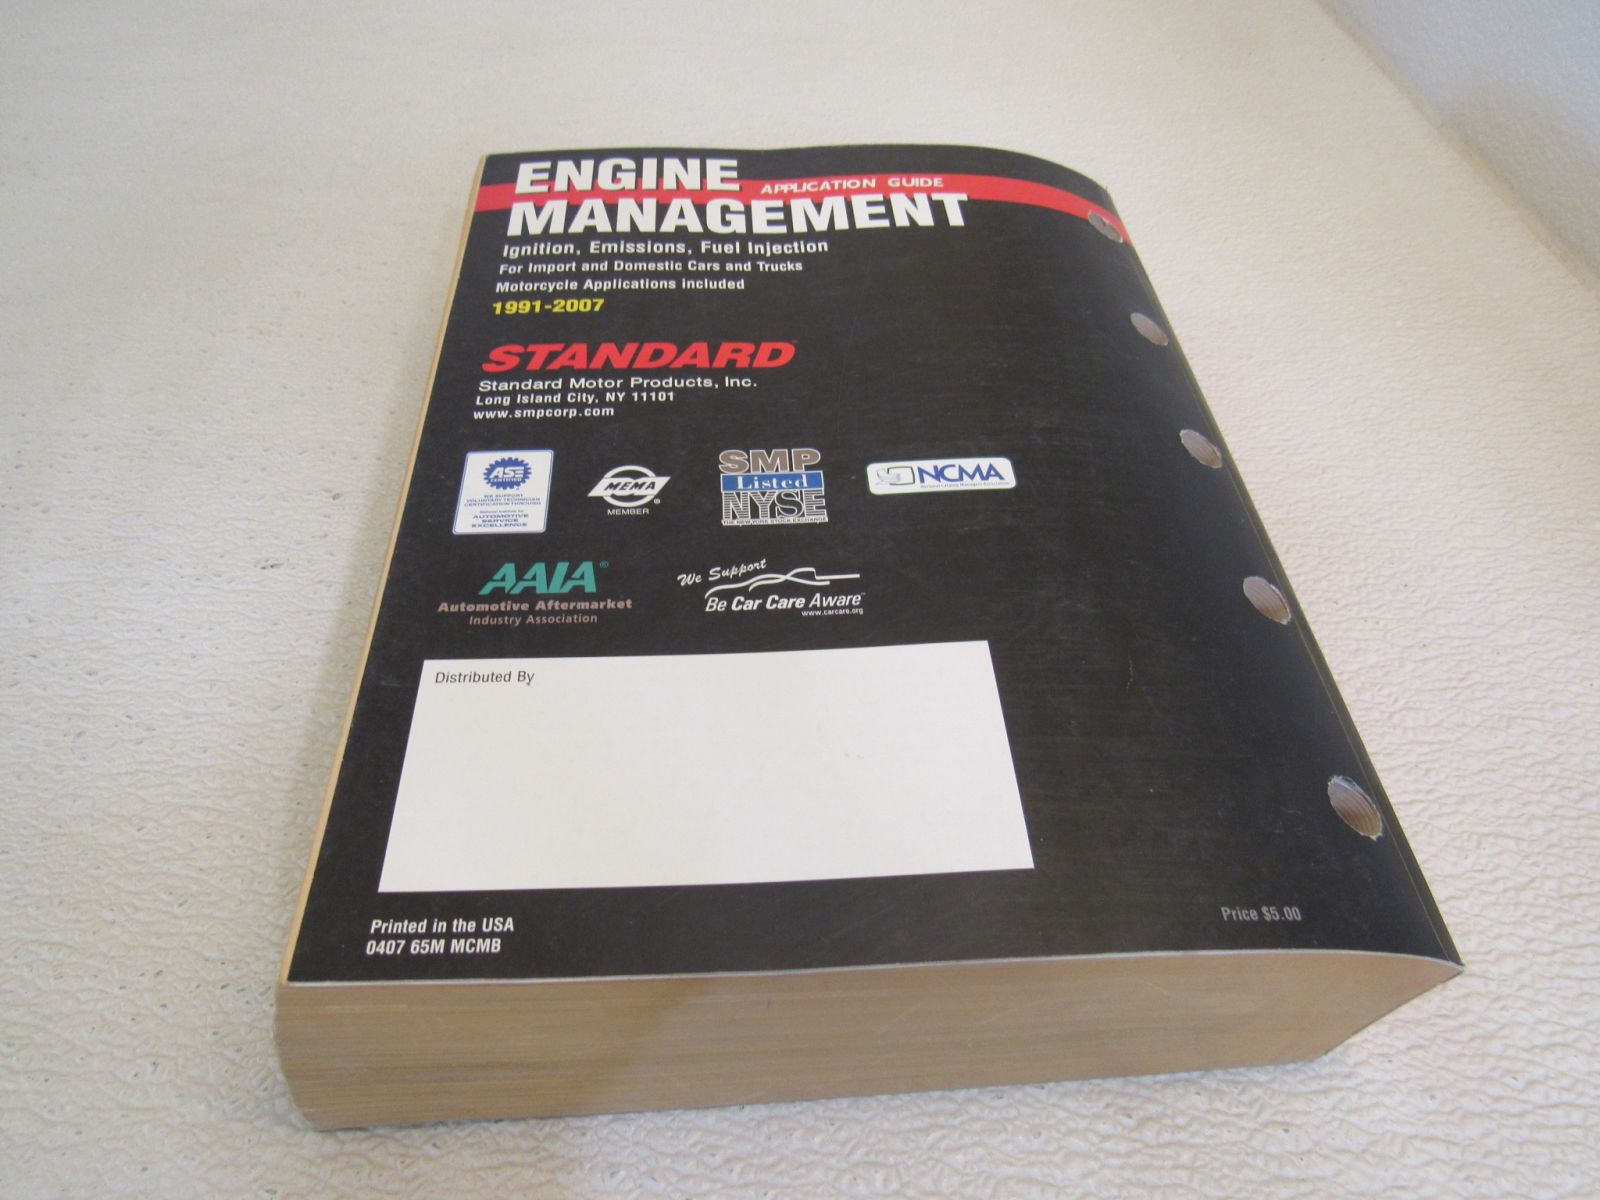 Standard Motor Products Inc Engine Management Application Guide 1991-2007 -- Used